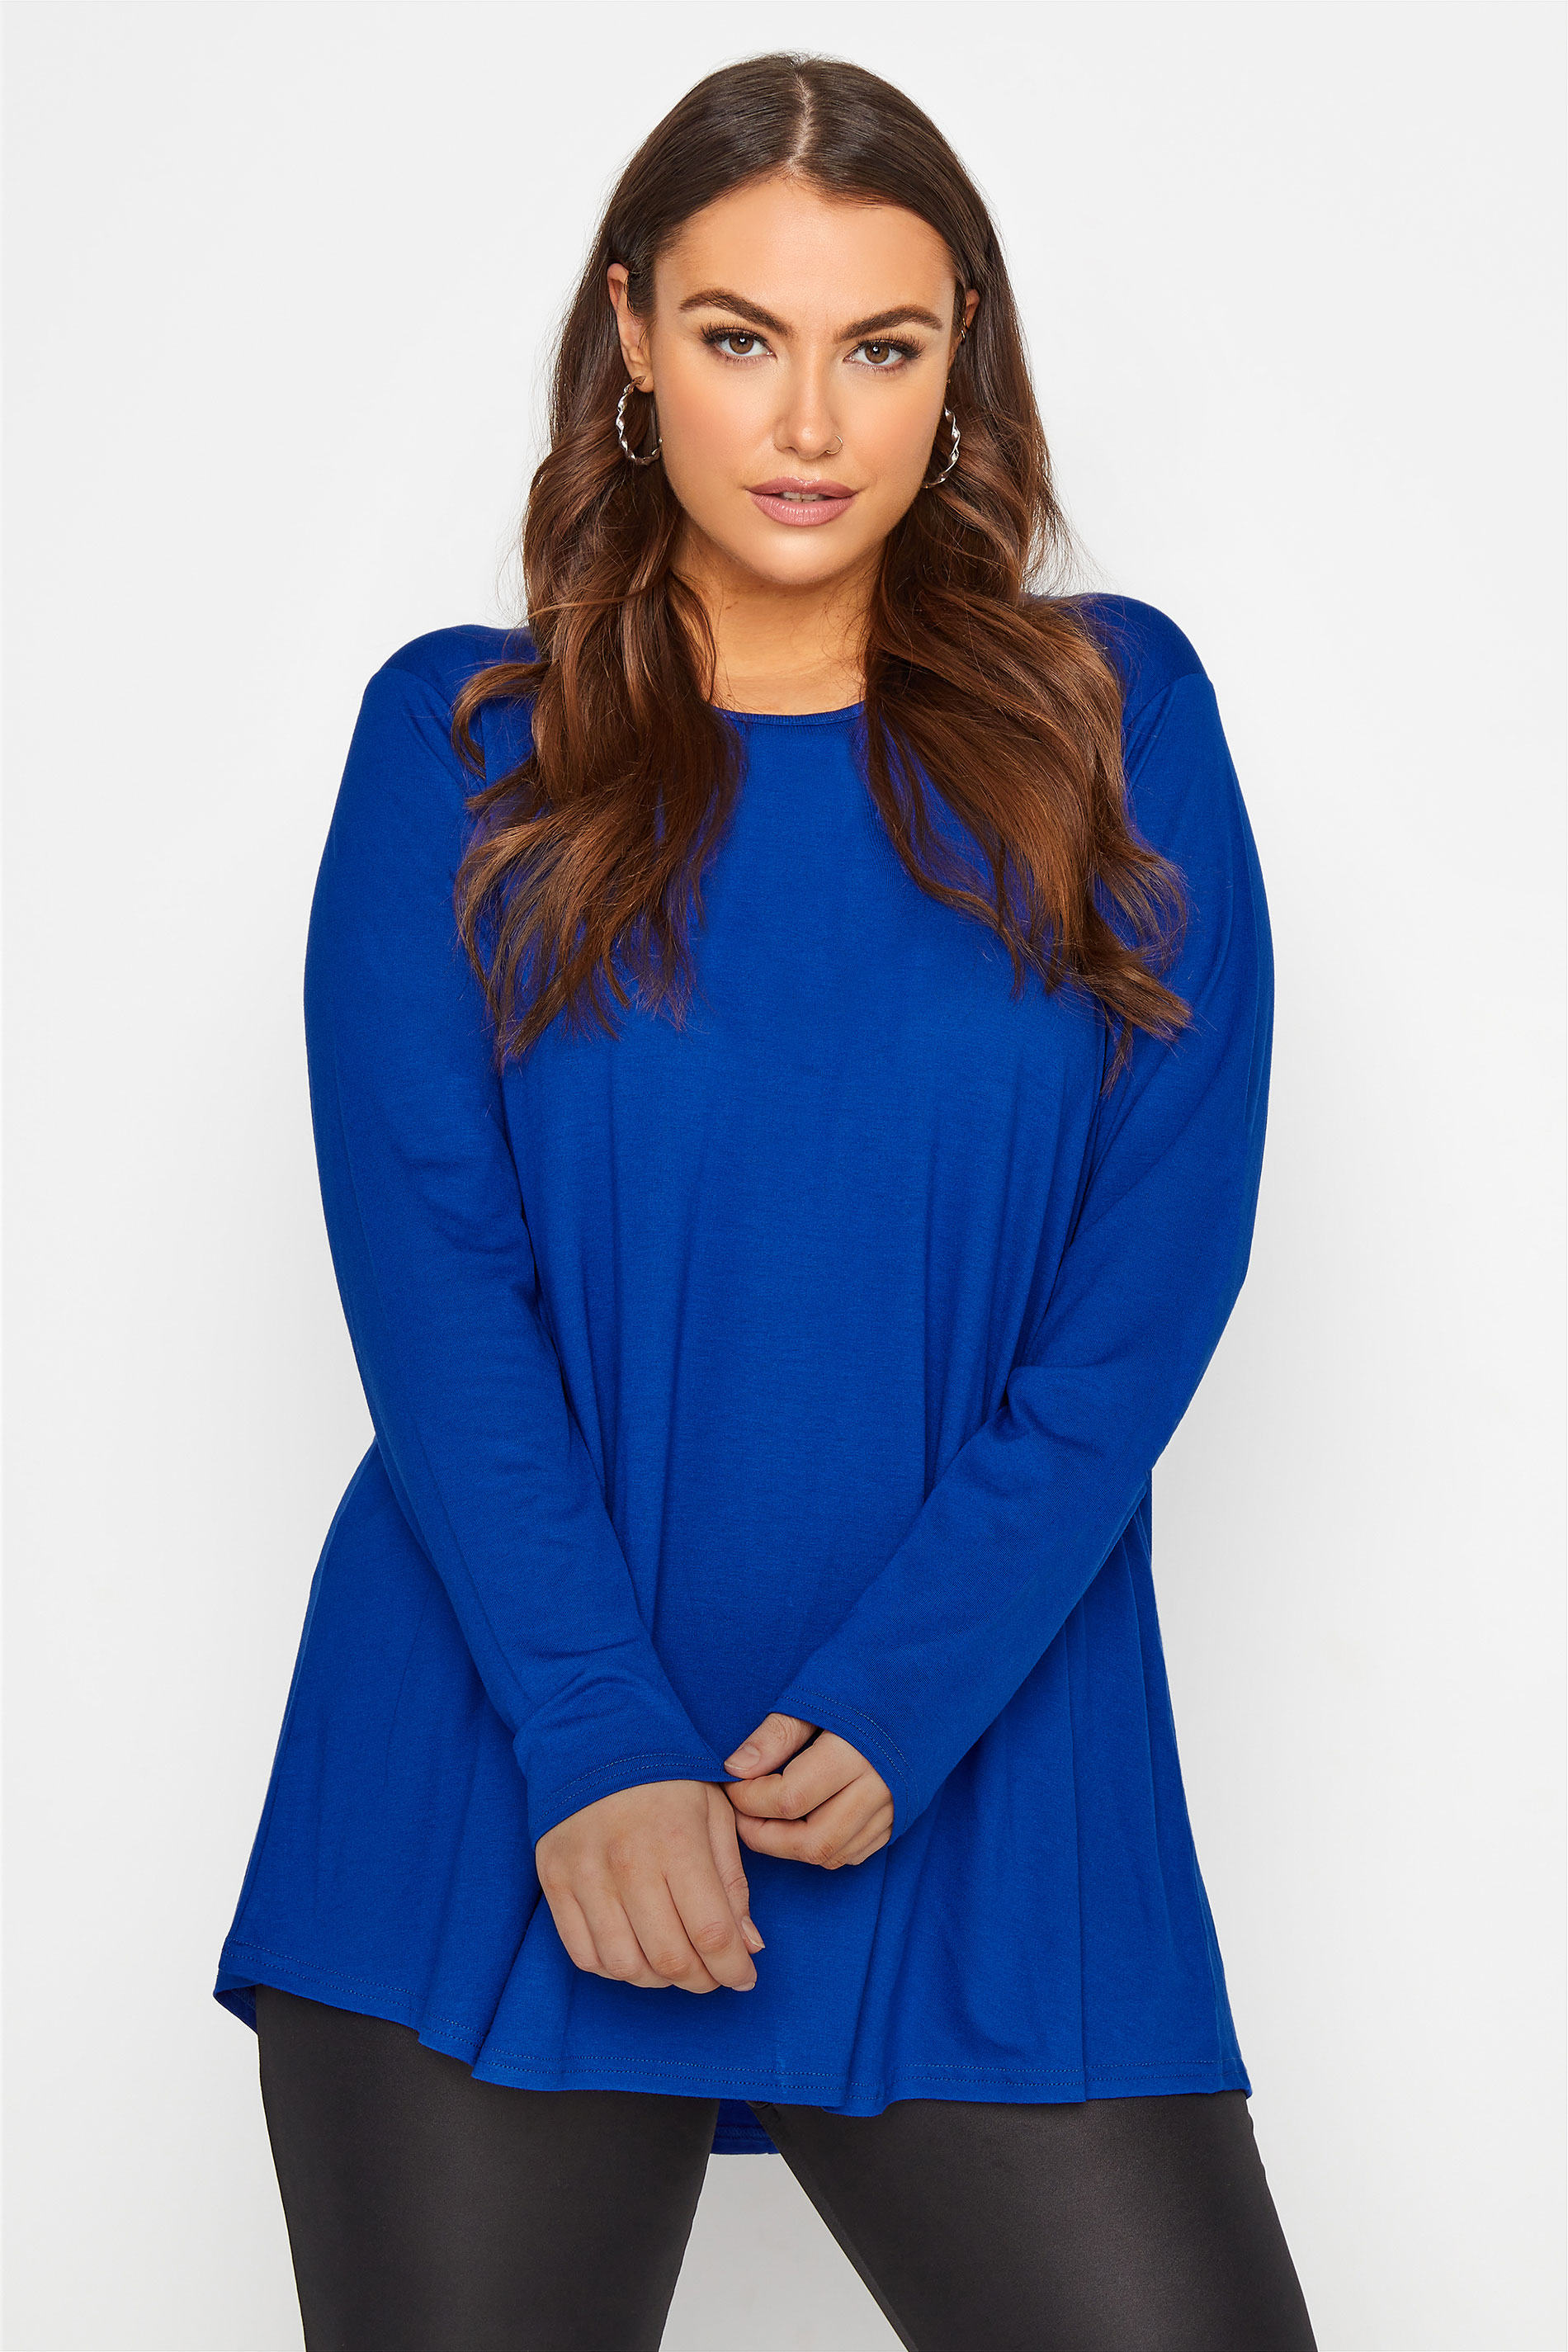 LIMITED COLLECTION Curve Royal Blue Swing Top 1